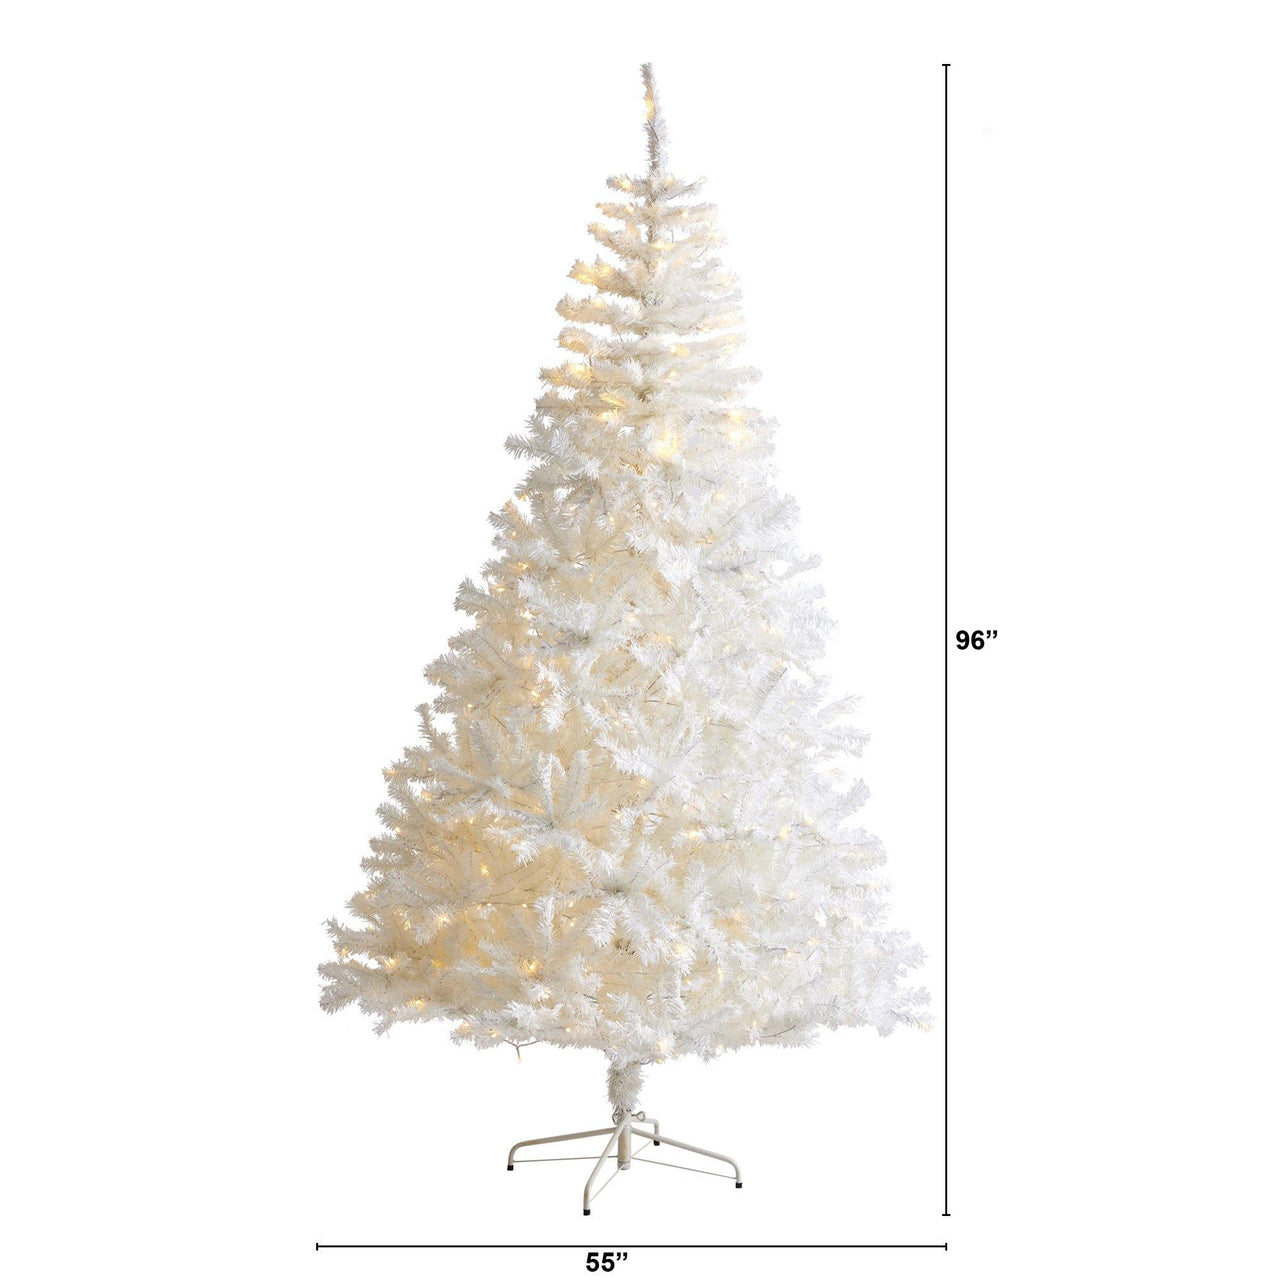 8' White Artificial Christmas Tree with 1500 Bendable Branches and 450 LED Lights - The Fox Decor